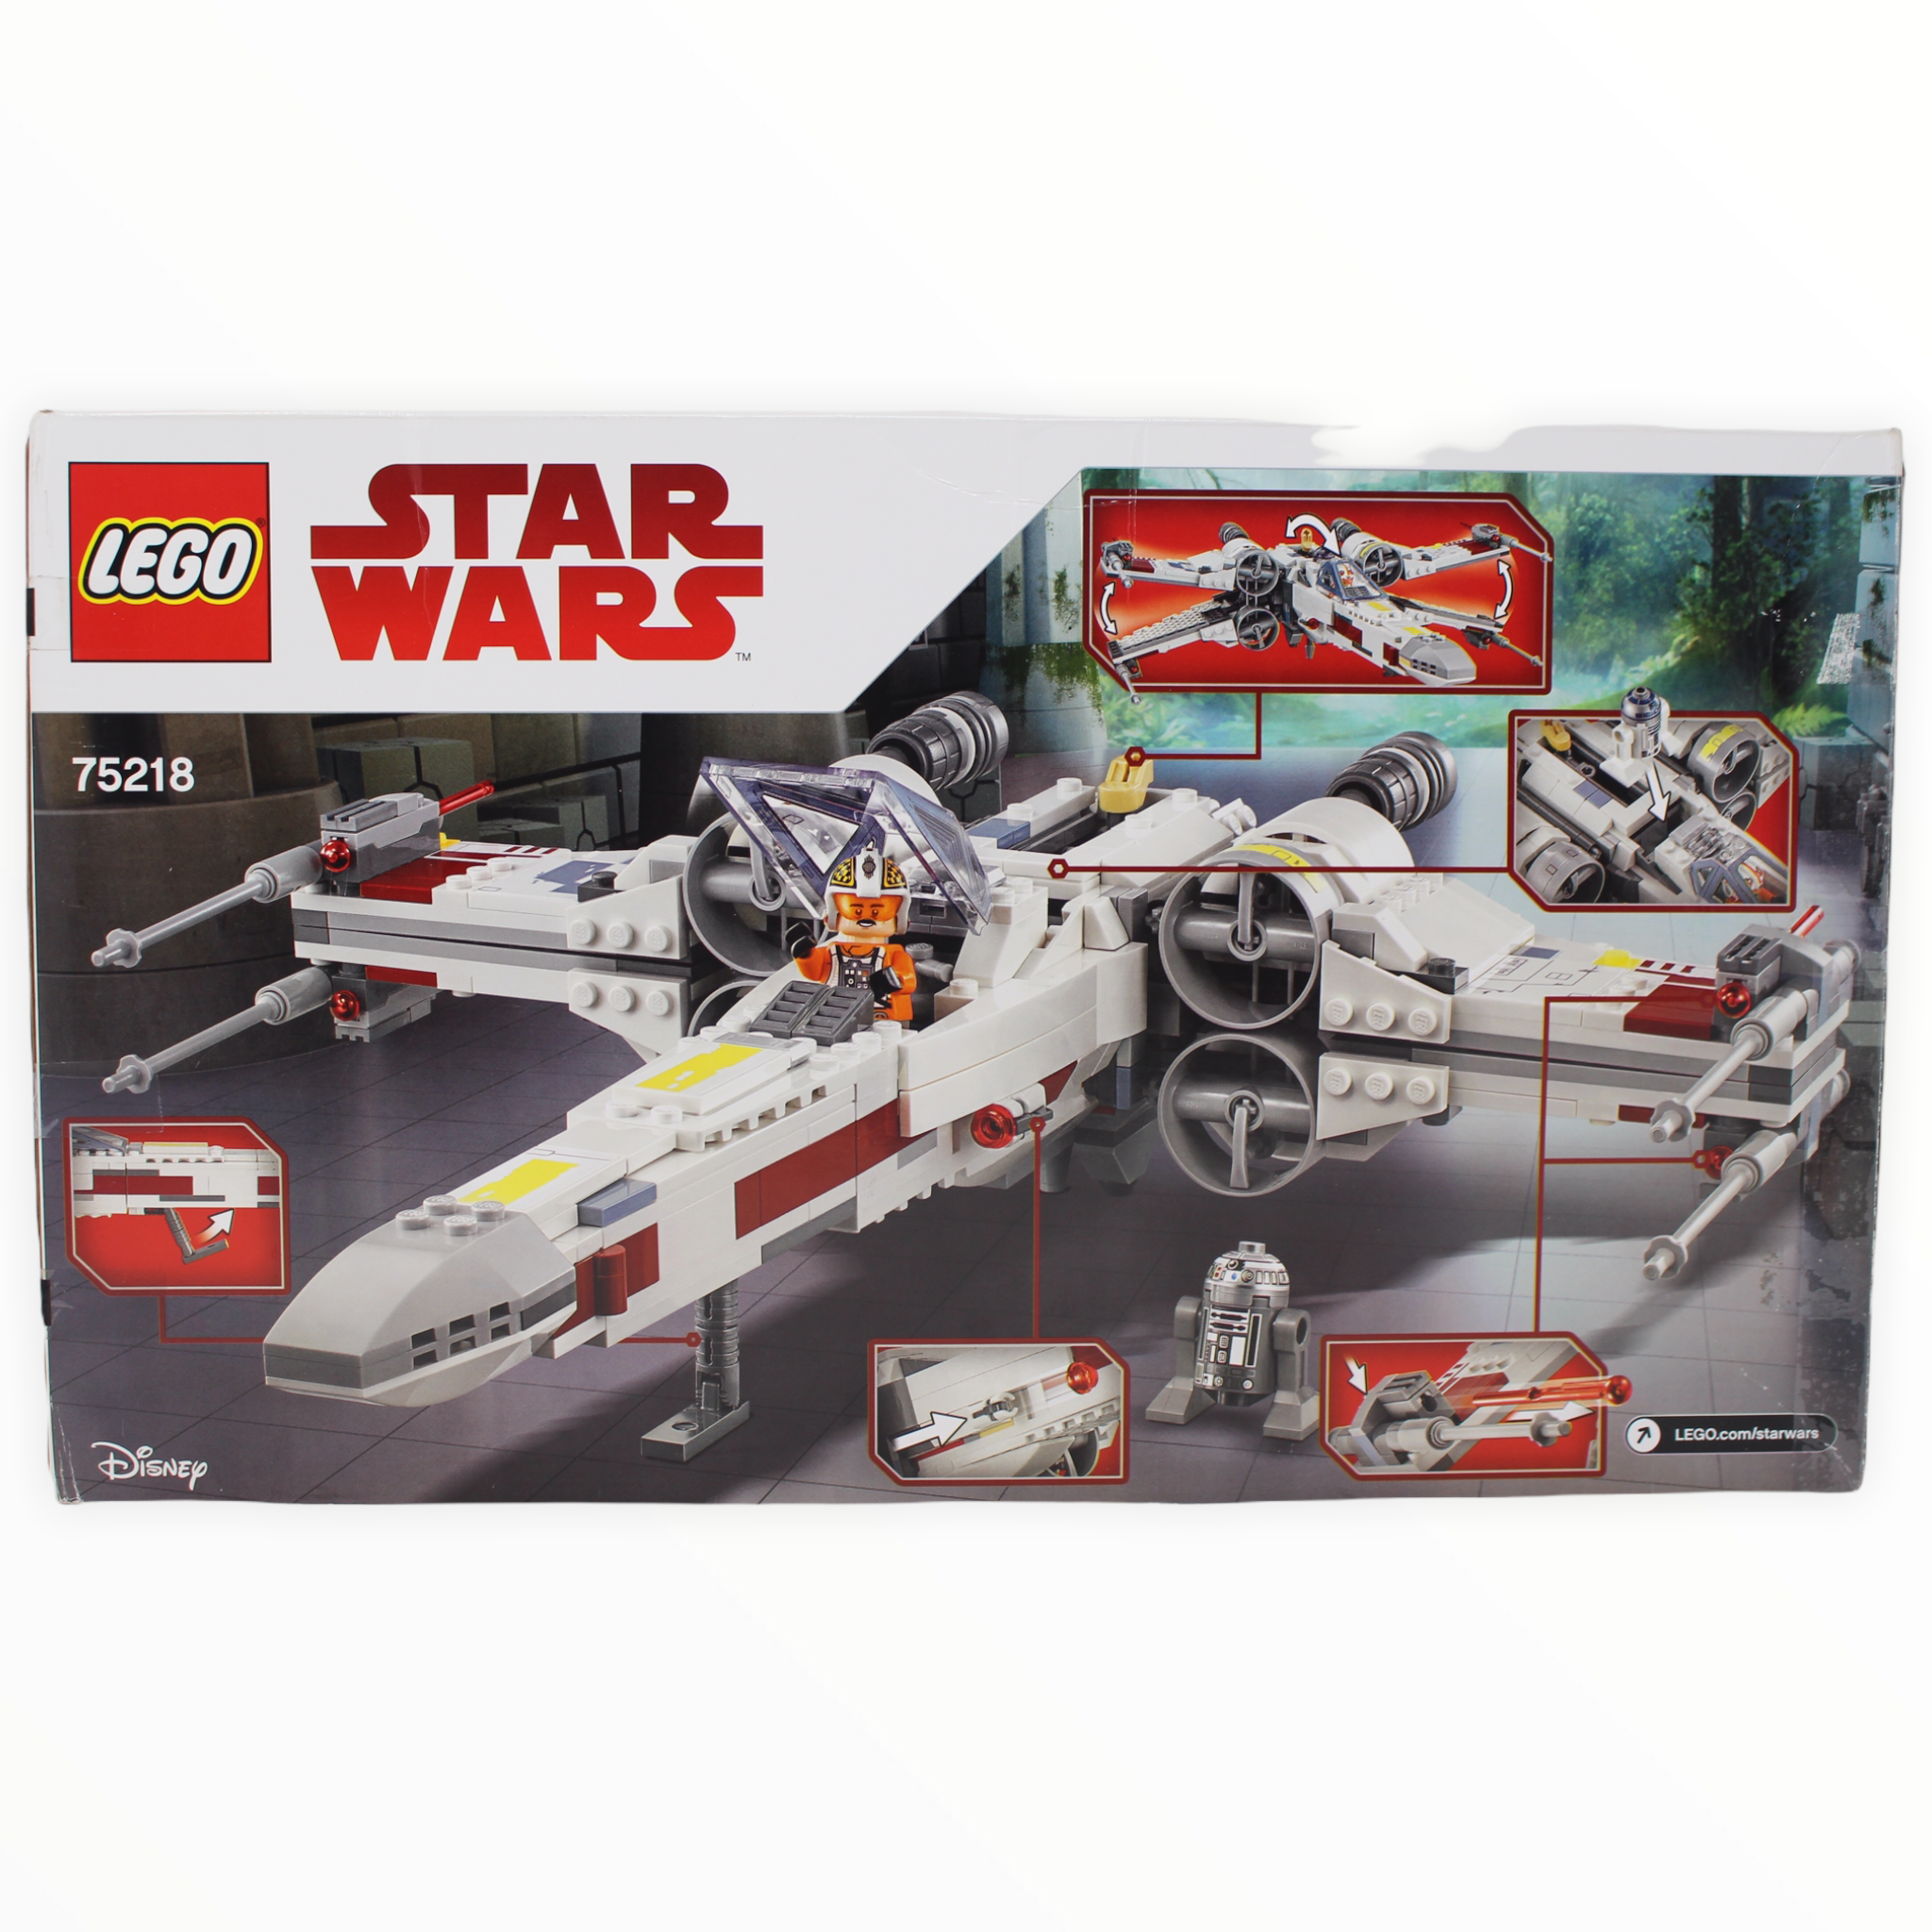 Certified Used Set 75218 Star Wars X-Wing Starfighter